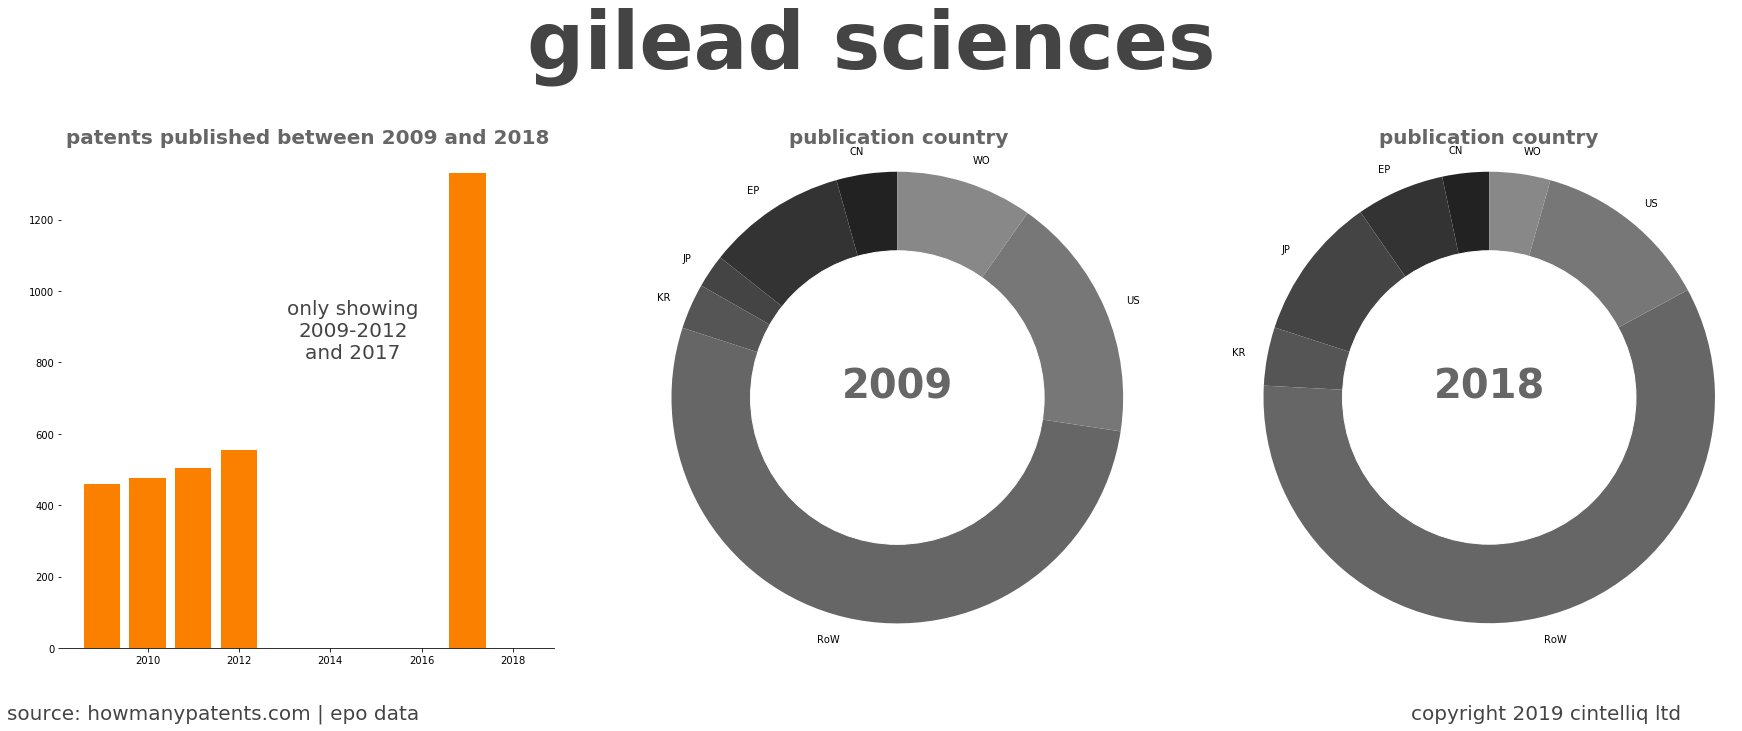 summary of patents for Gilead Sciences